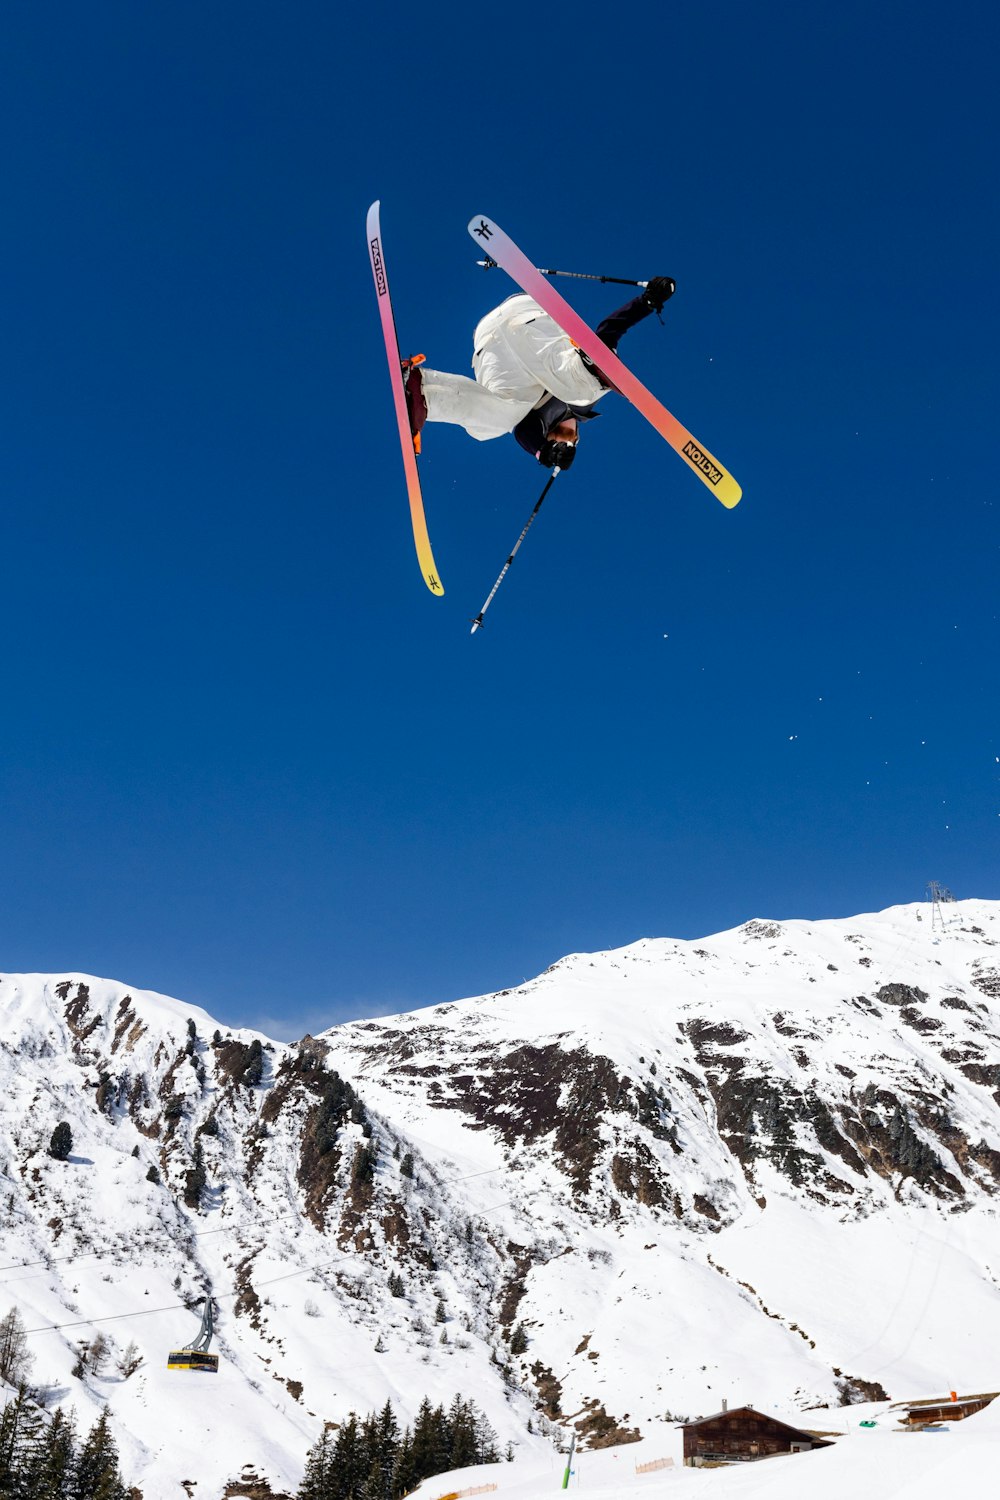 a person on skis jumping in the air